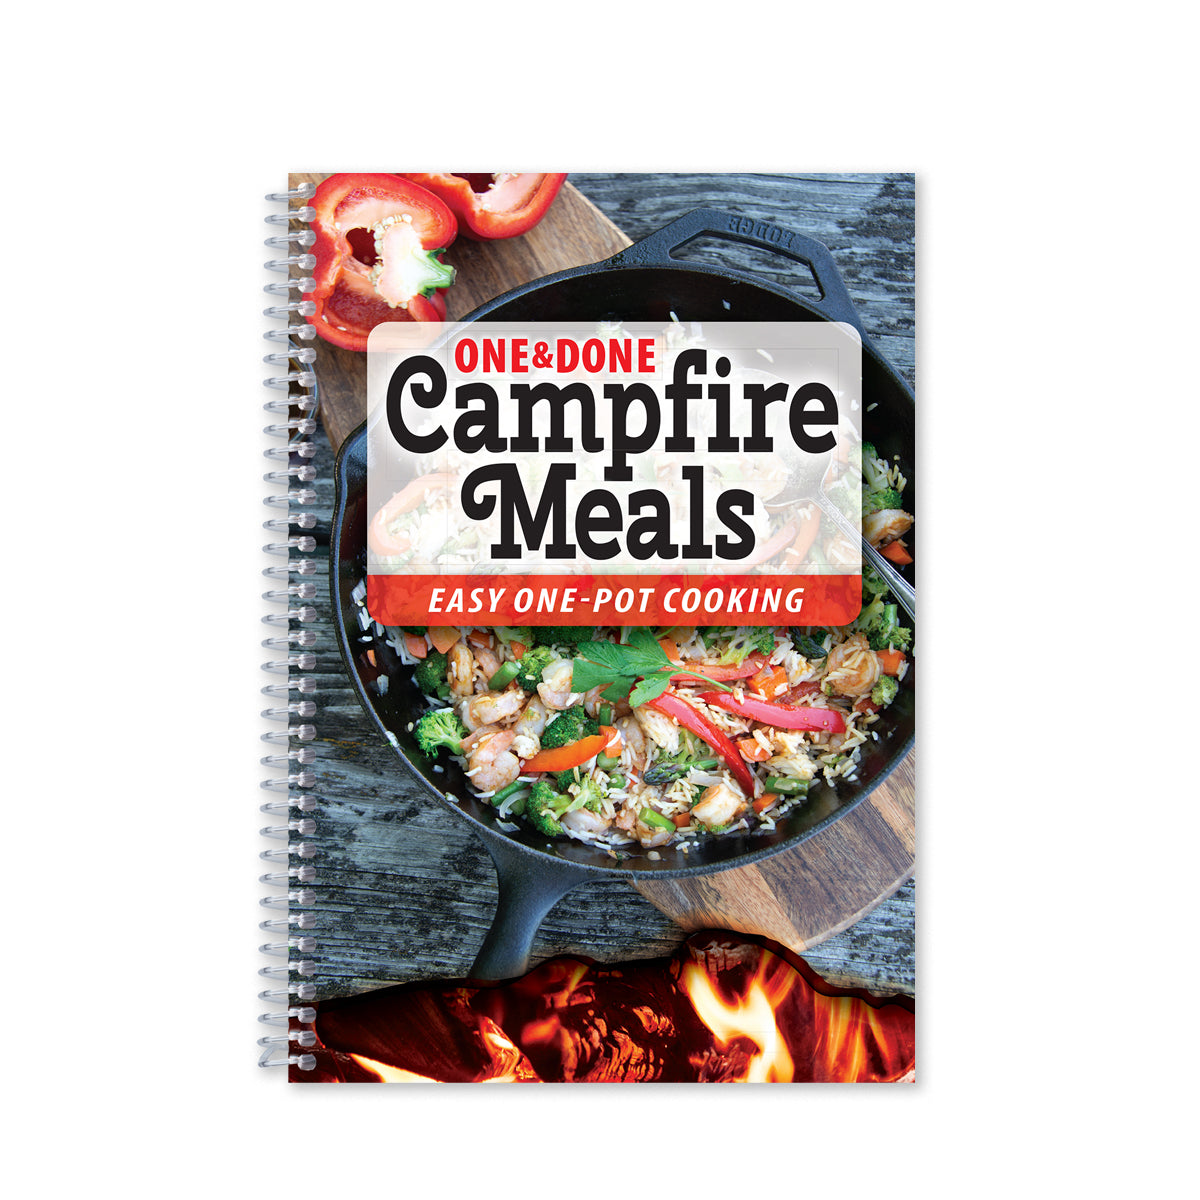 One & Done Campfire Meals